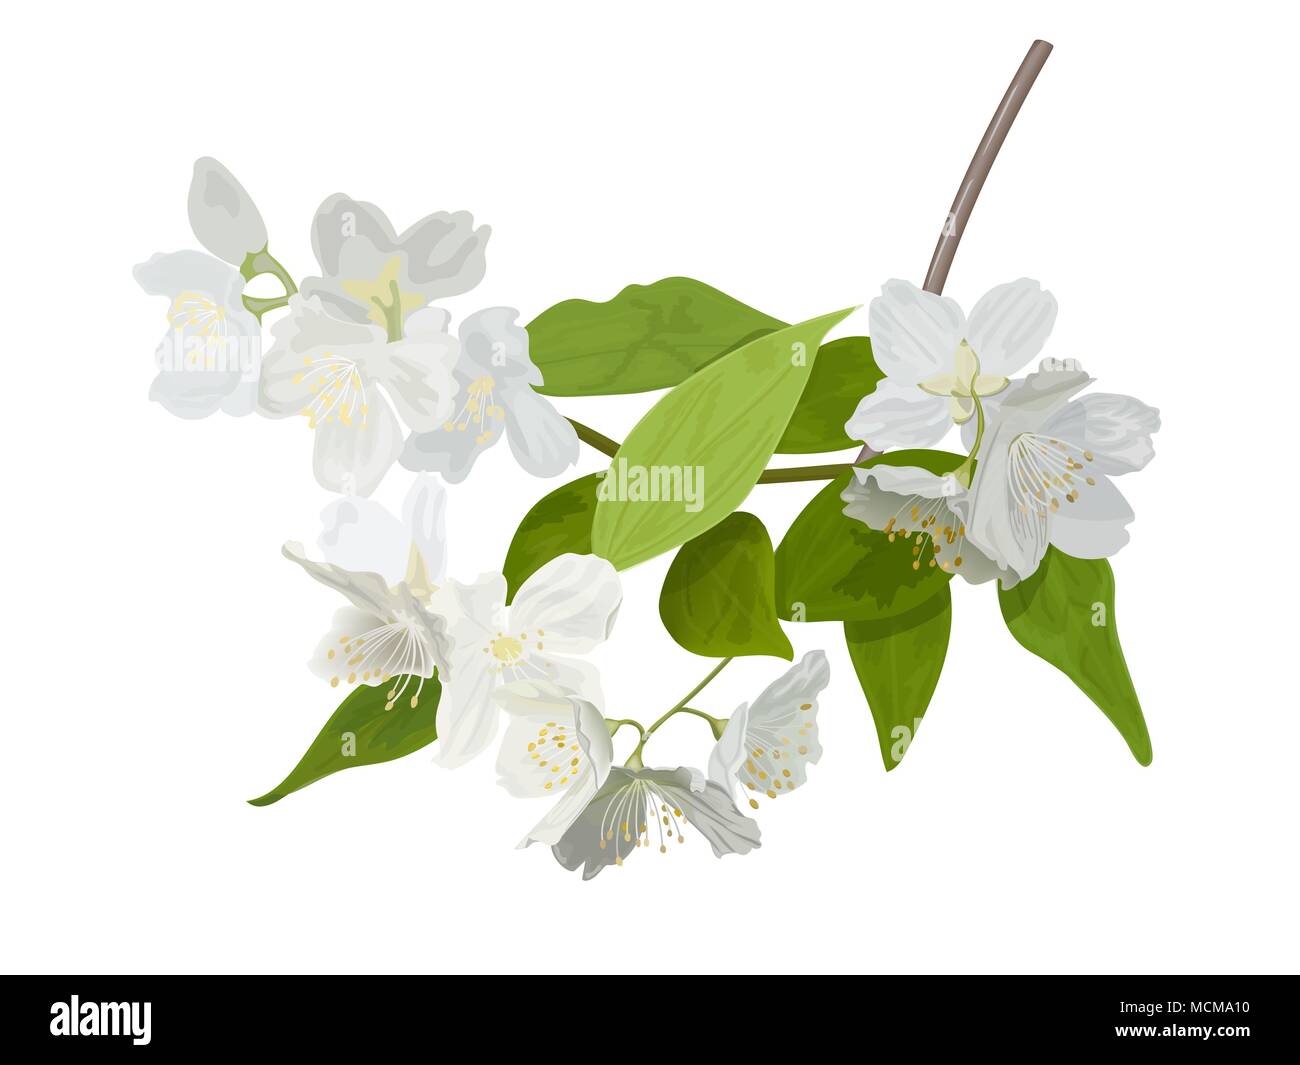 The blossoming season. Blooming tree with delicate white flowers. Twig with flower buds. Stock Vector